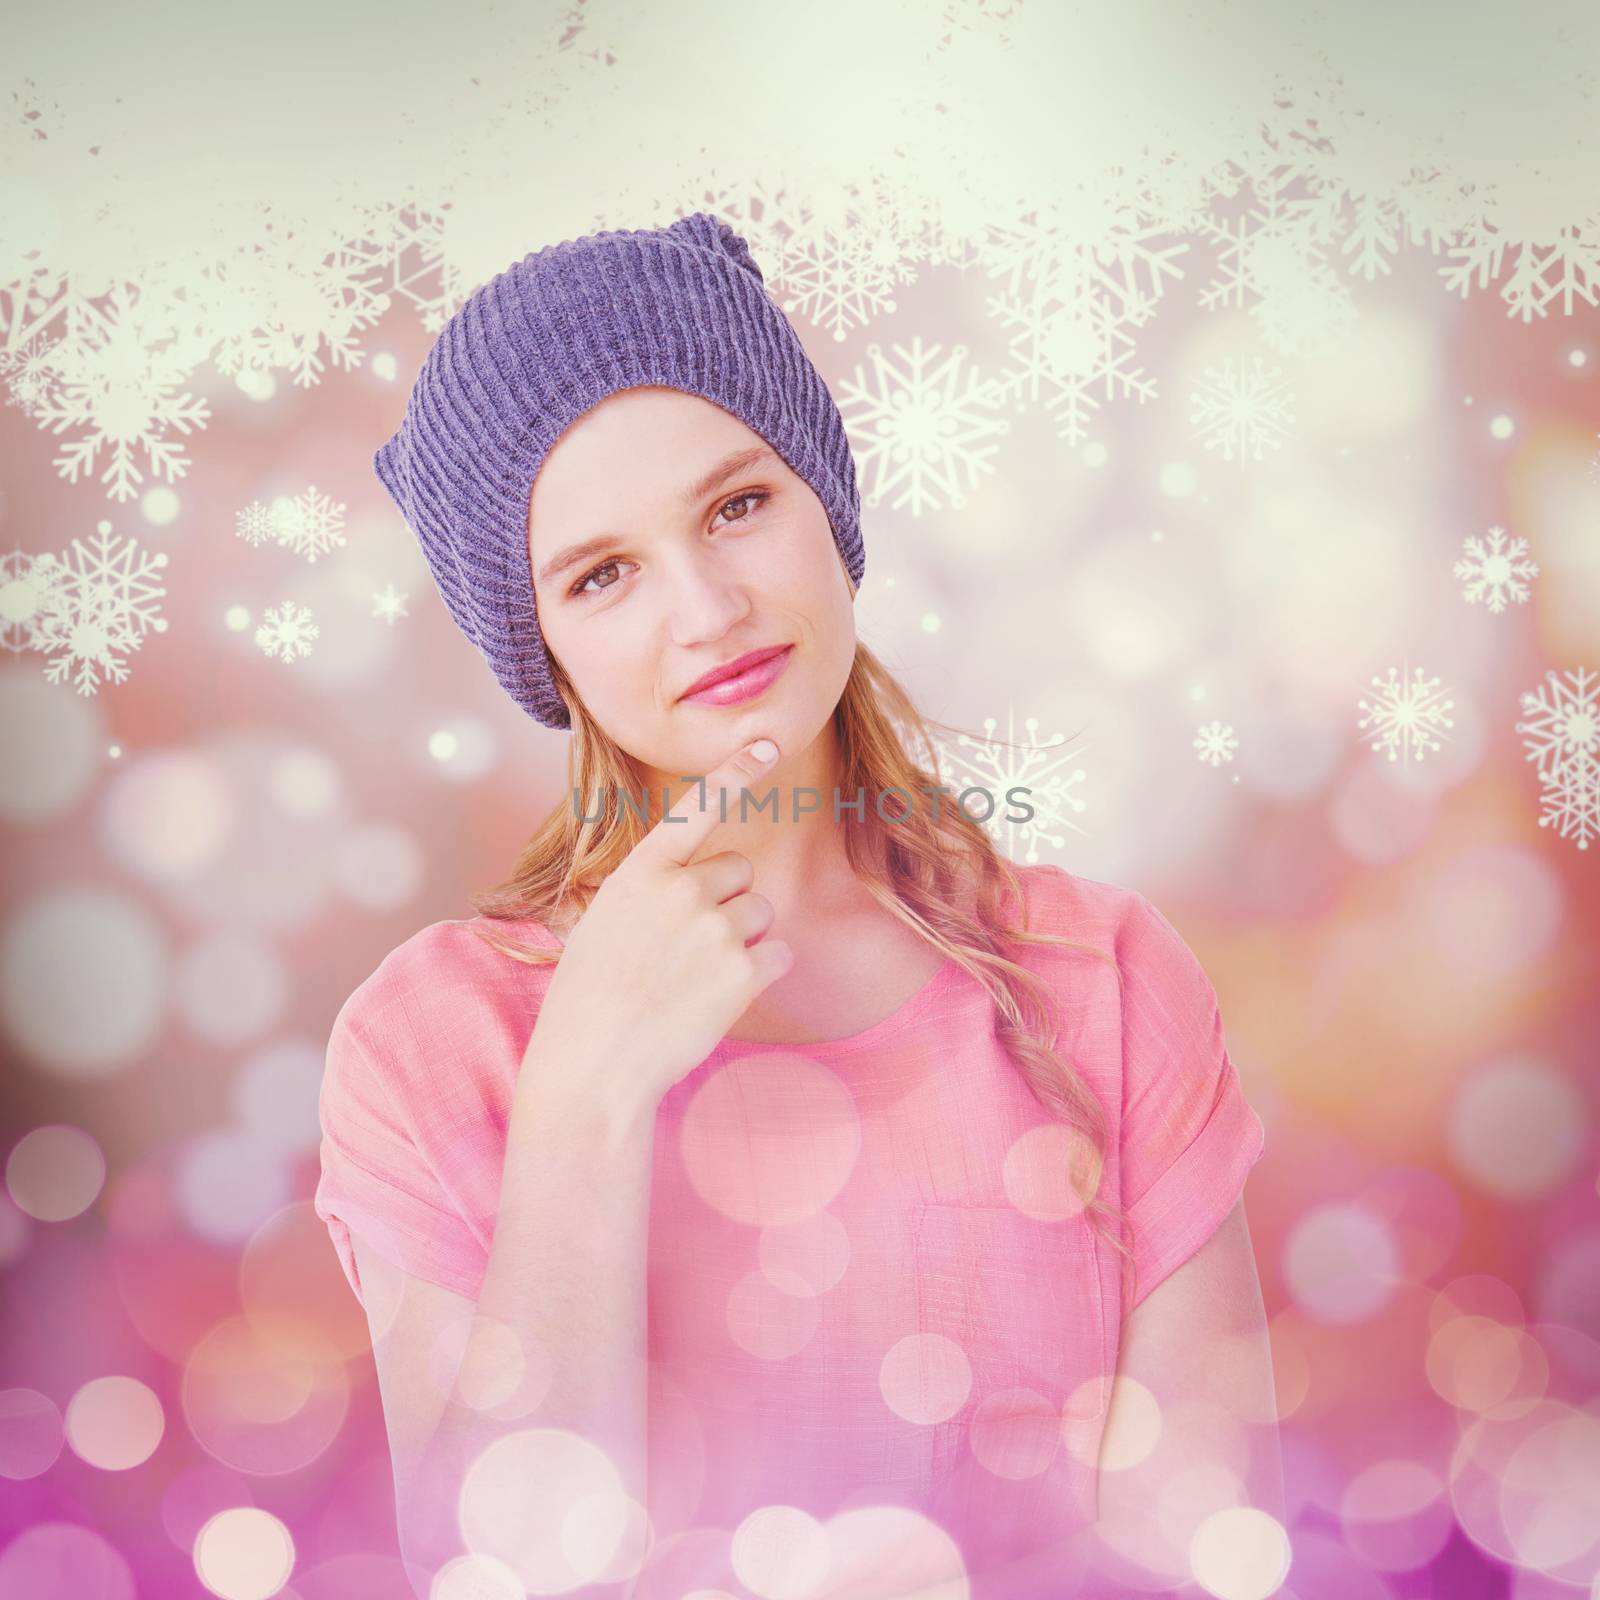 Hipster woman with hat looking at camera against snowflake pattern